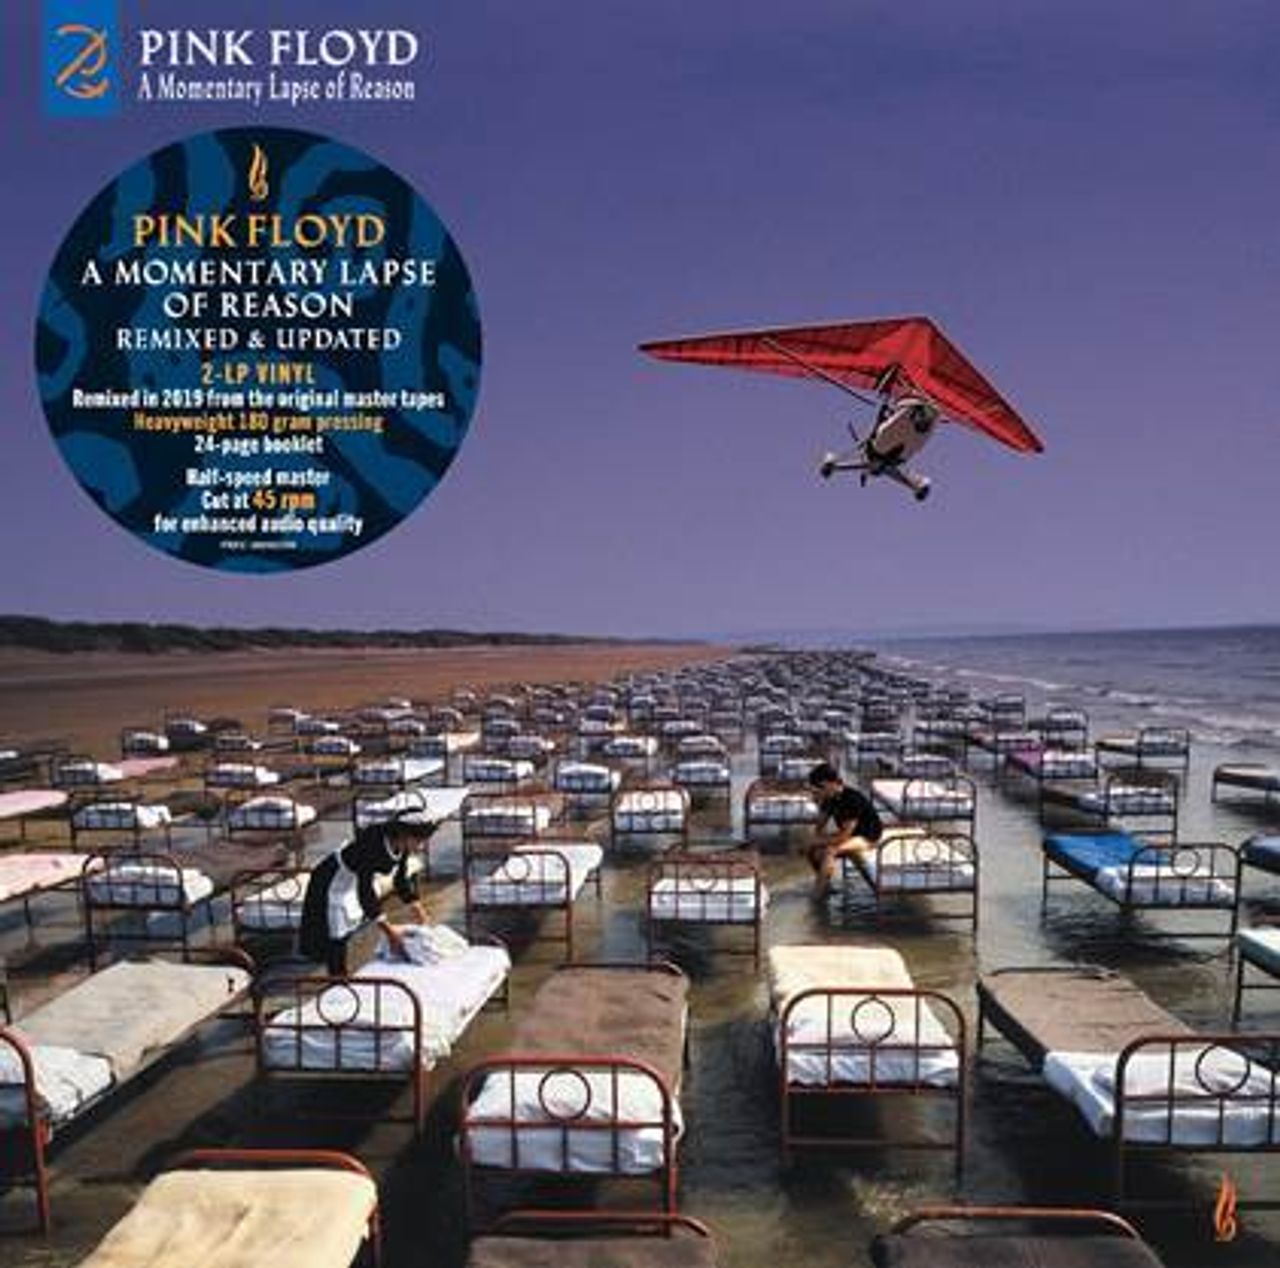 Pink Floyd A Momentary Lapse Of Reason - Remixed & Updated - Sealed UK 2-LP vinyl record set (Double LP Album) PIN2LAM778012